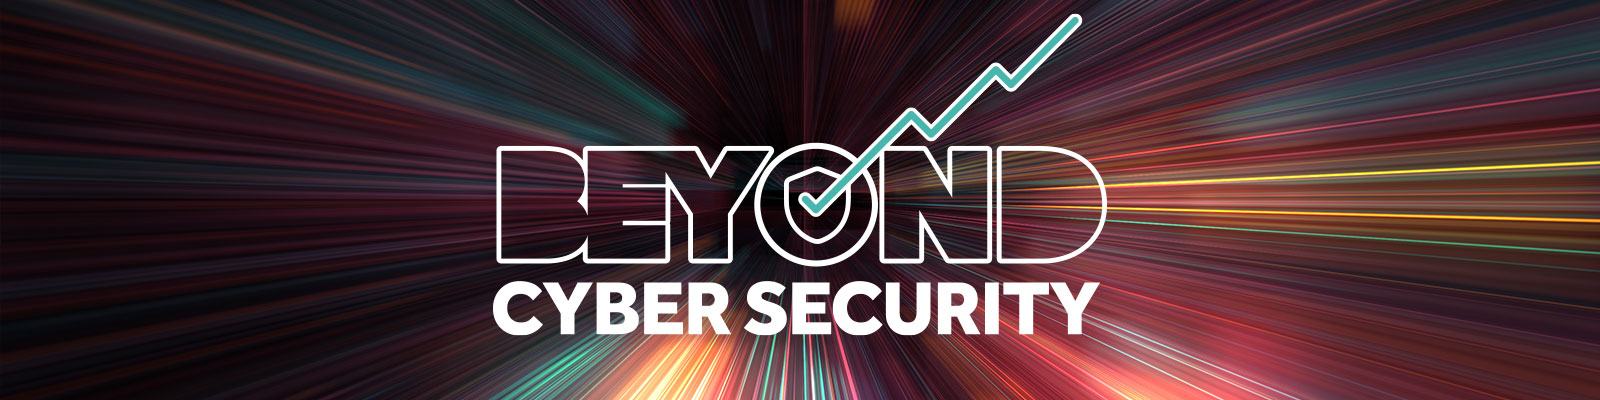 Beyond Cyber Security